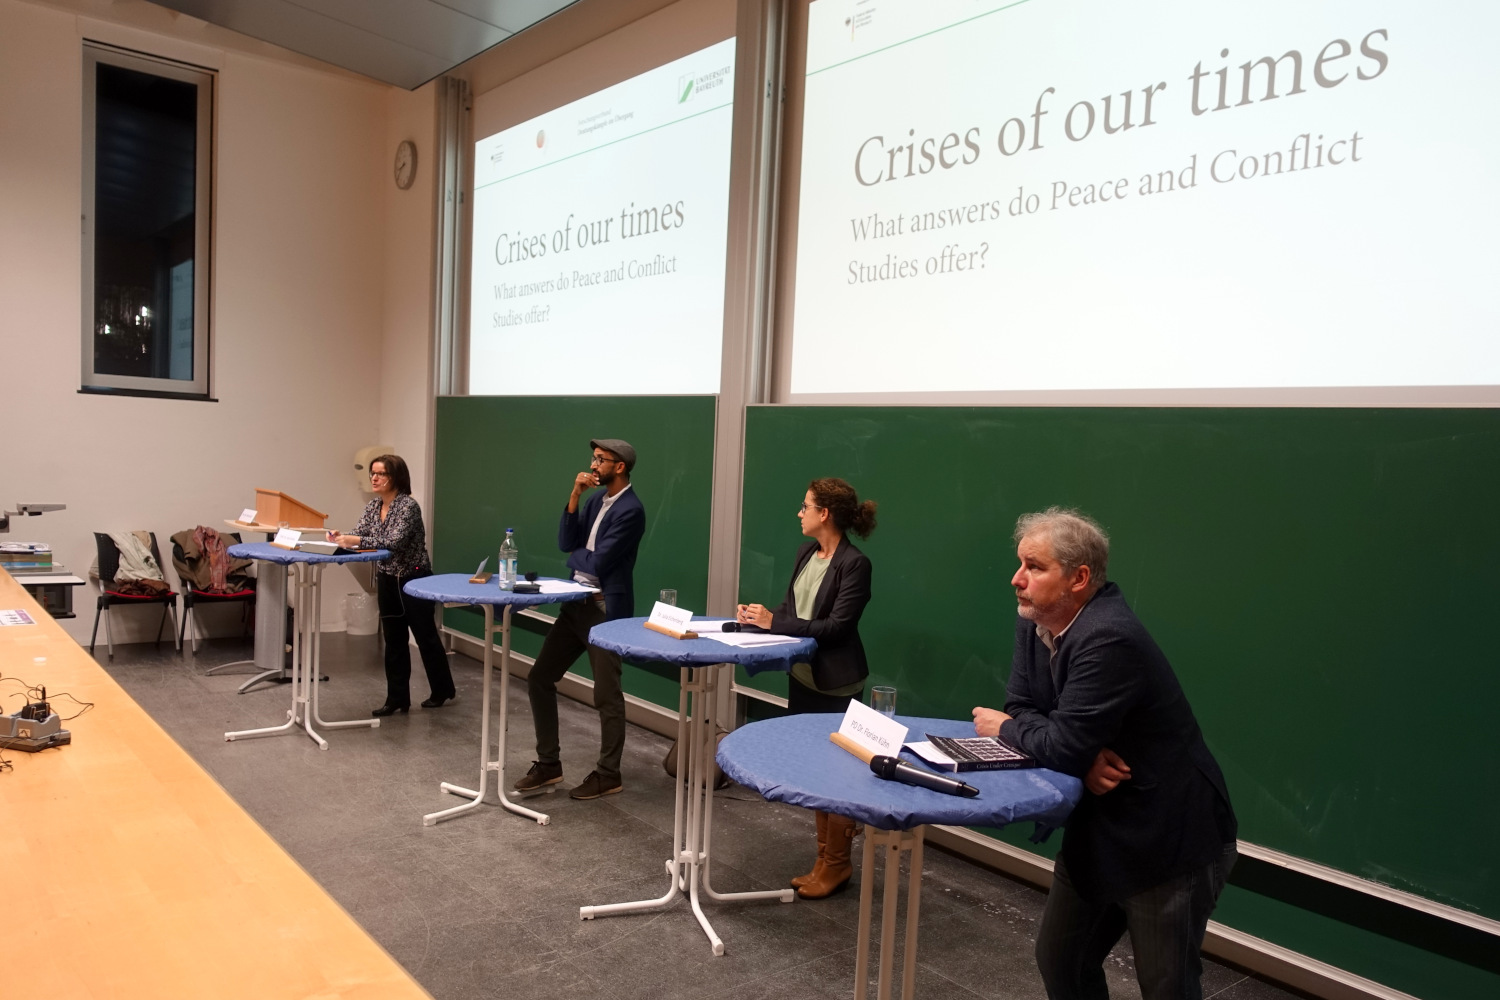 Roundtable discussion "Crises of our times"